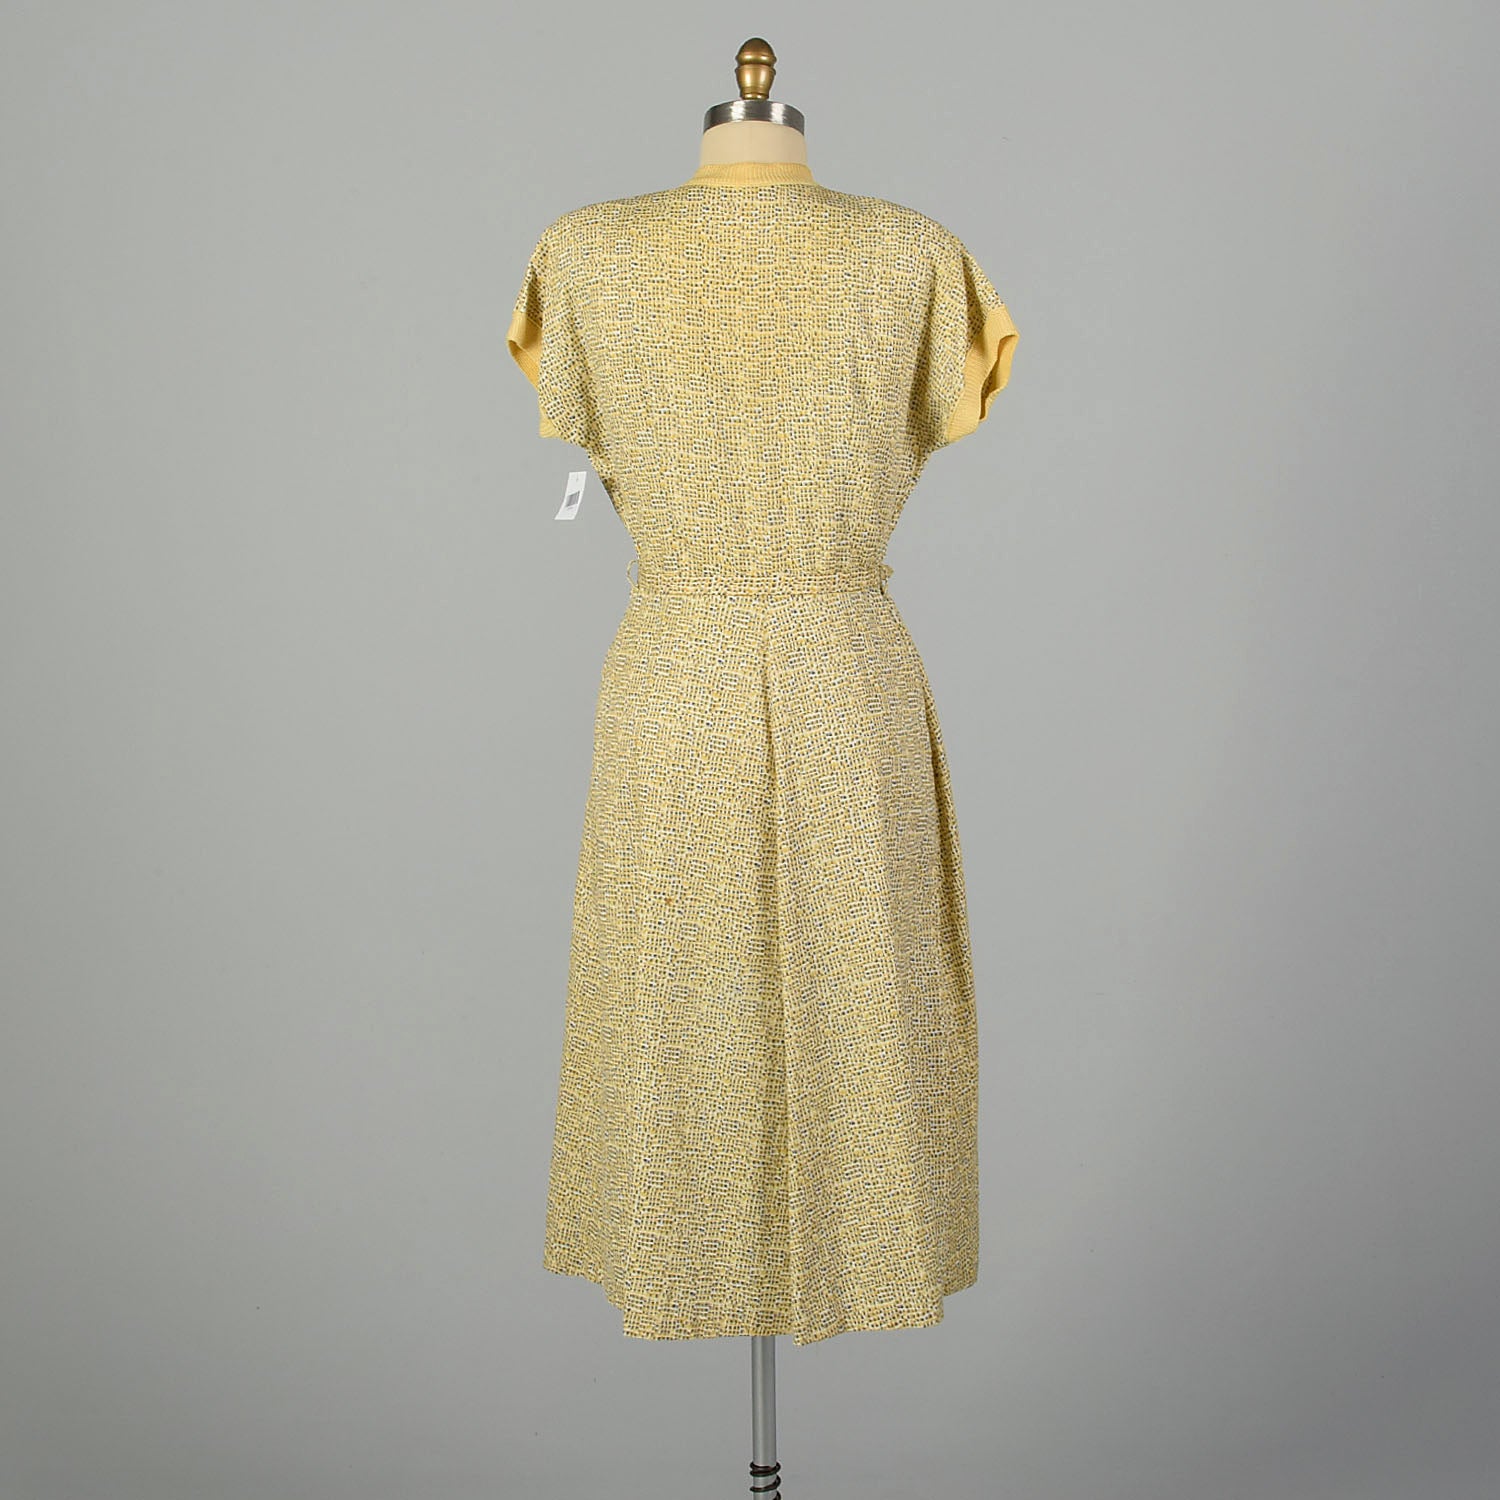 Large 1950s Yellow and Gray Geometric Print Day Dress with Belt